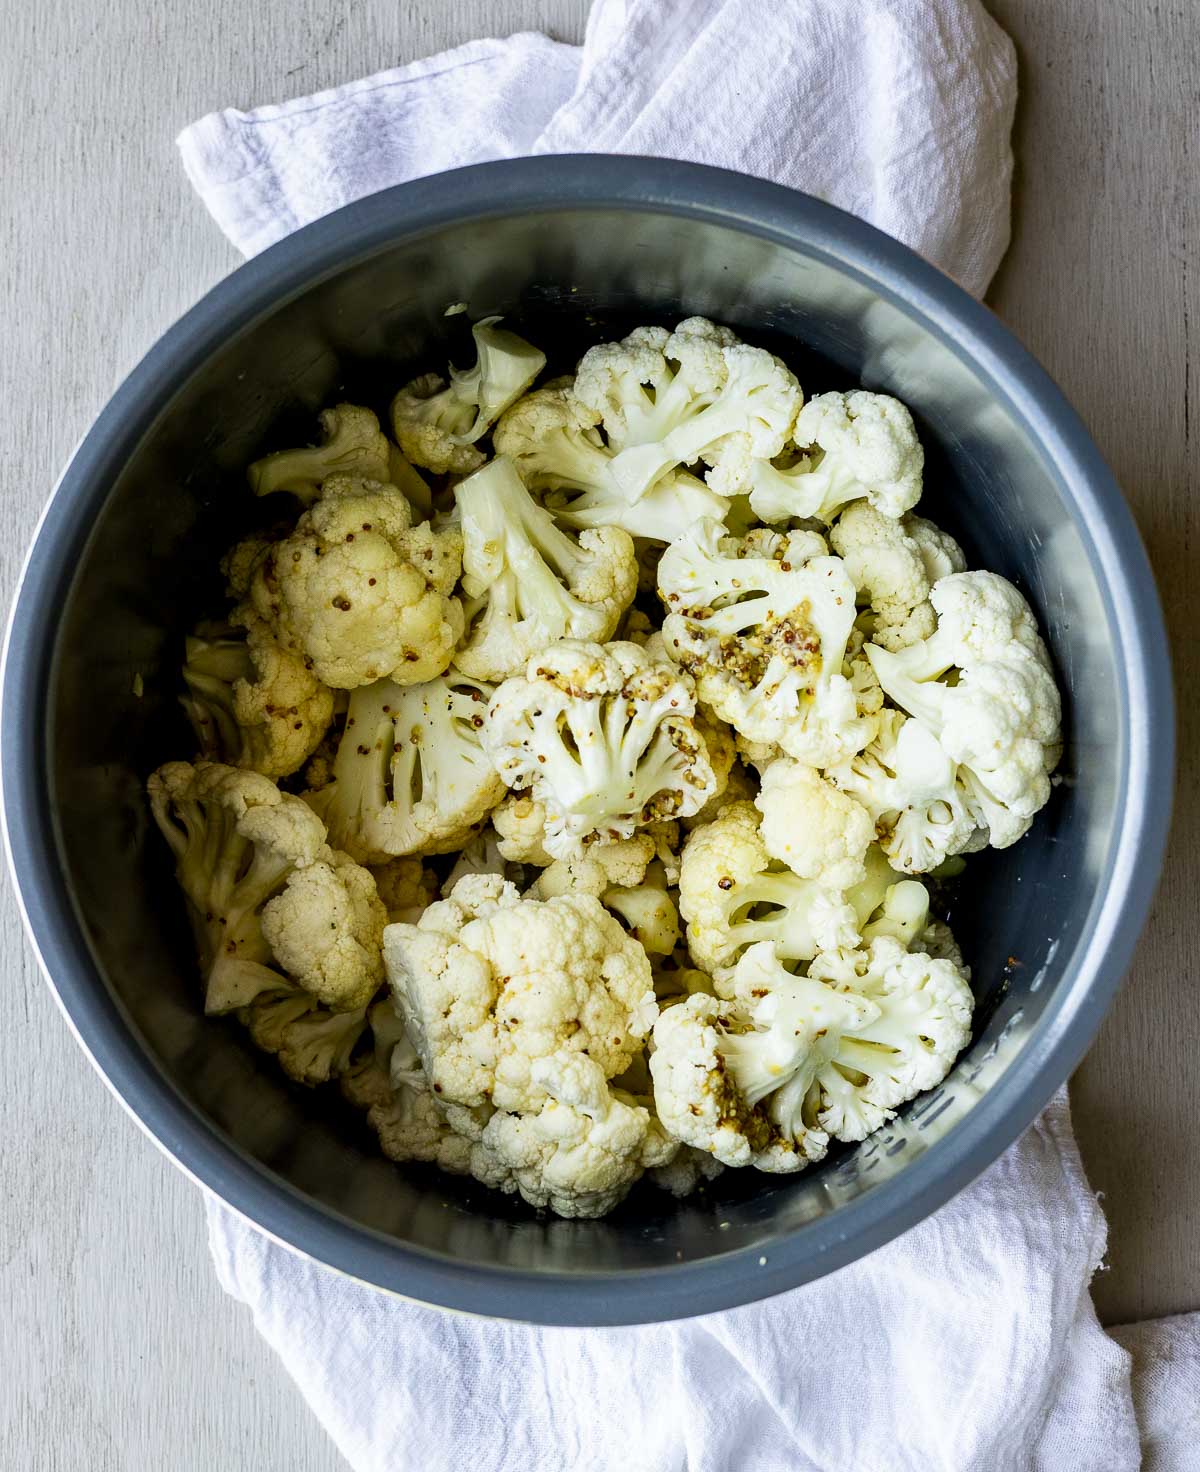 Raw cauliflower florets added to the Instant Pot insert.